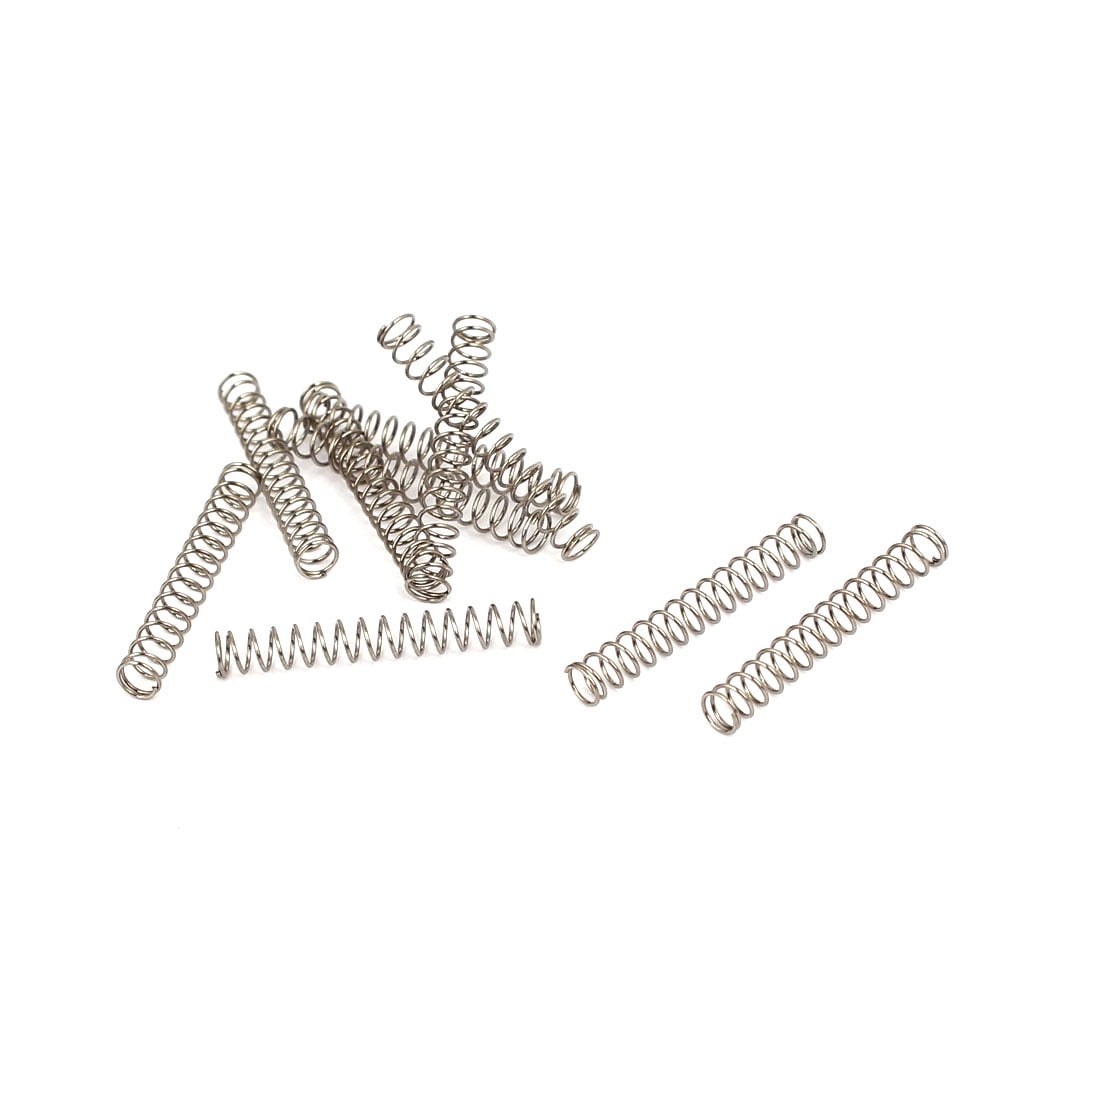 0.3mmx3mmx20mm 304 Stainless Steel Tension Springs Silver Tone 10pcs 